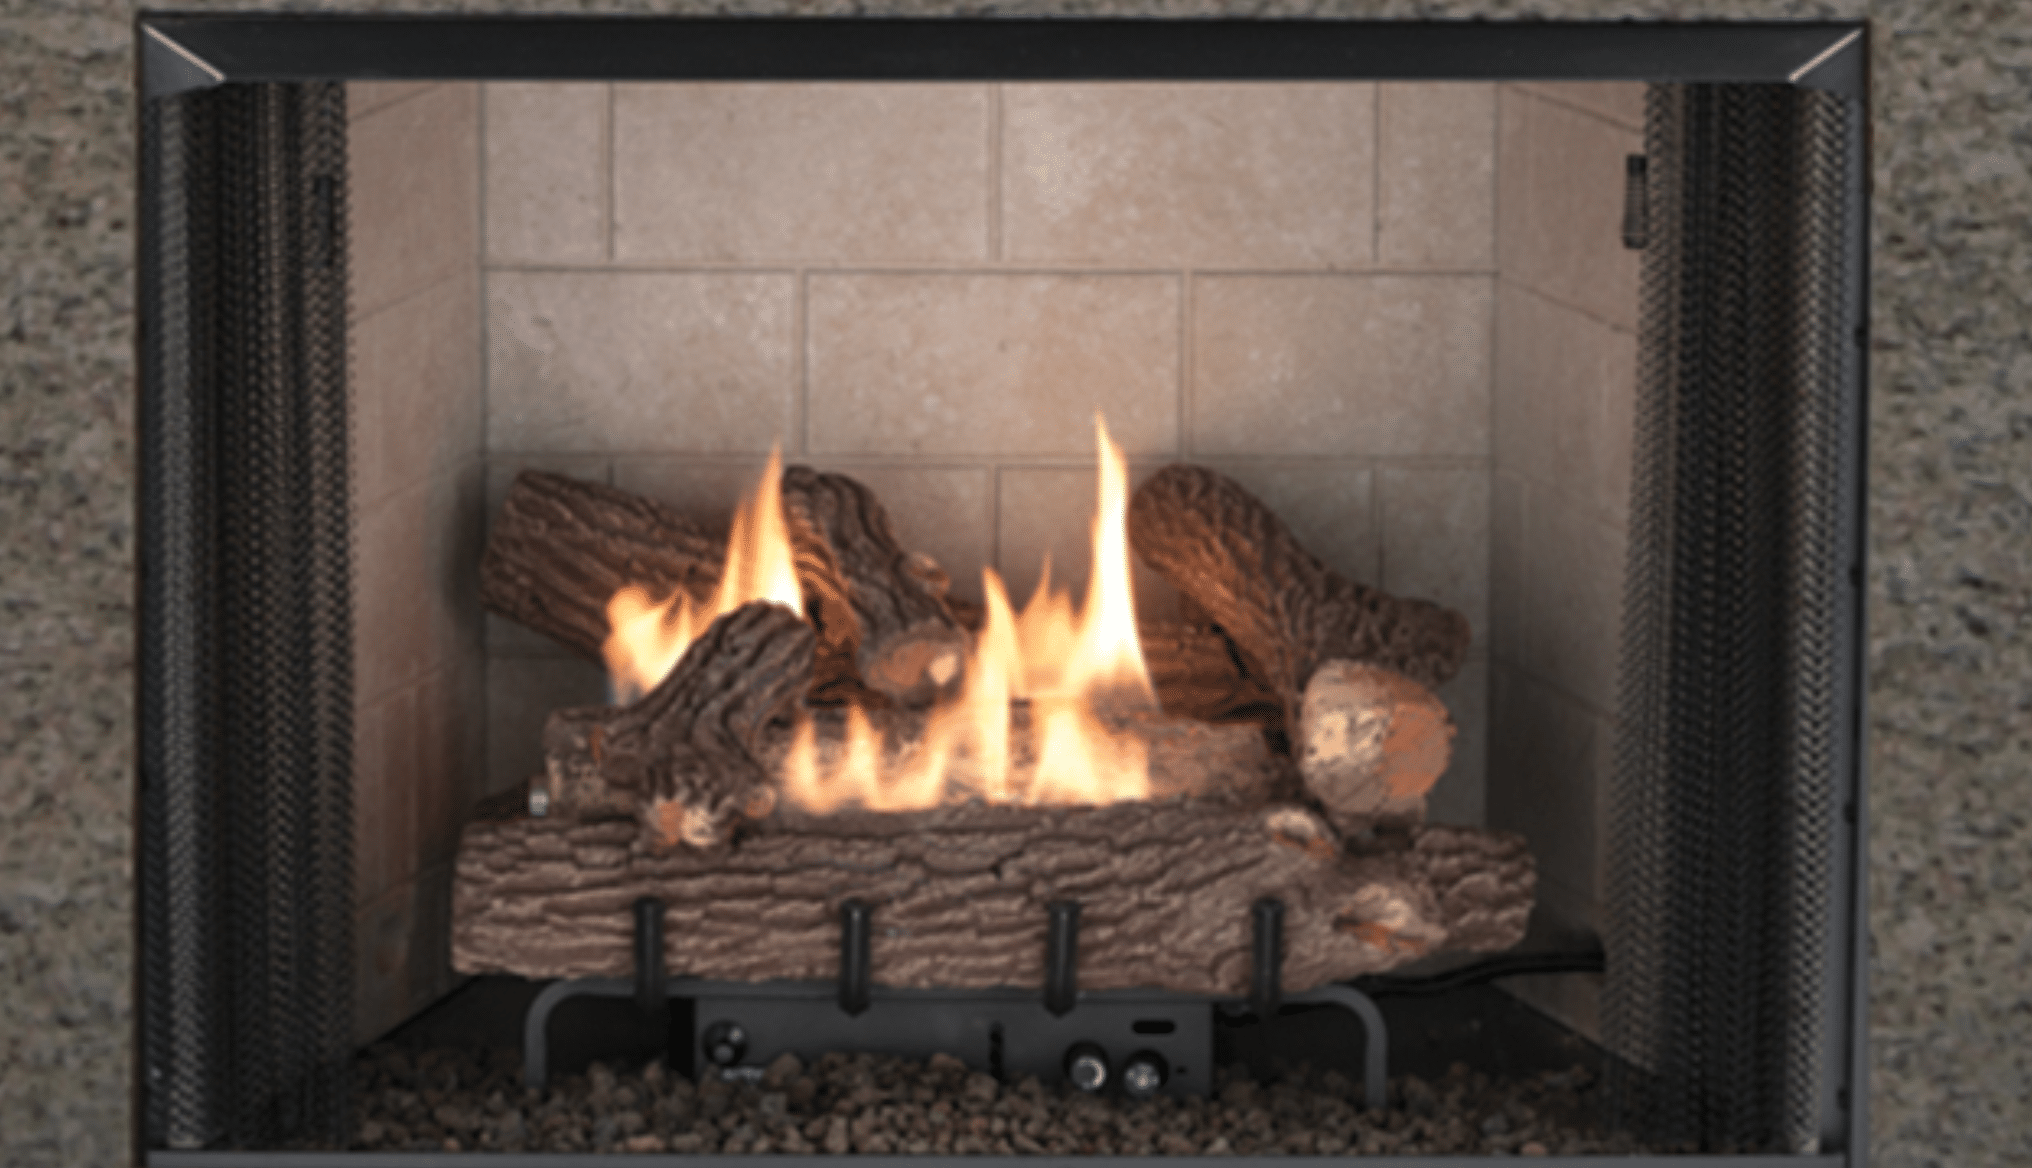 Ventless fireplace with logs and yellow flame.